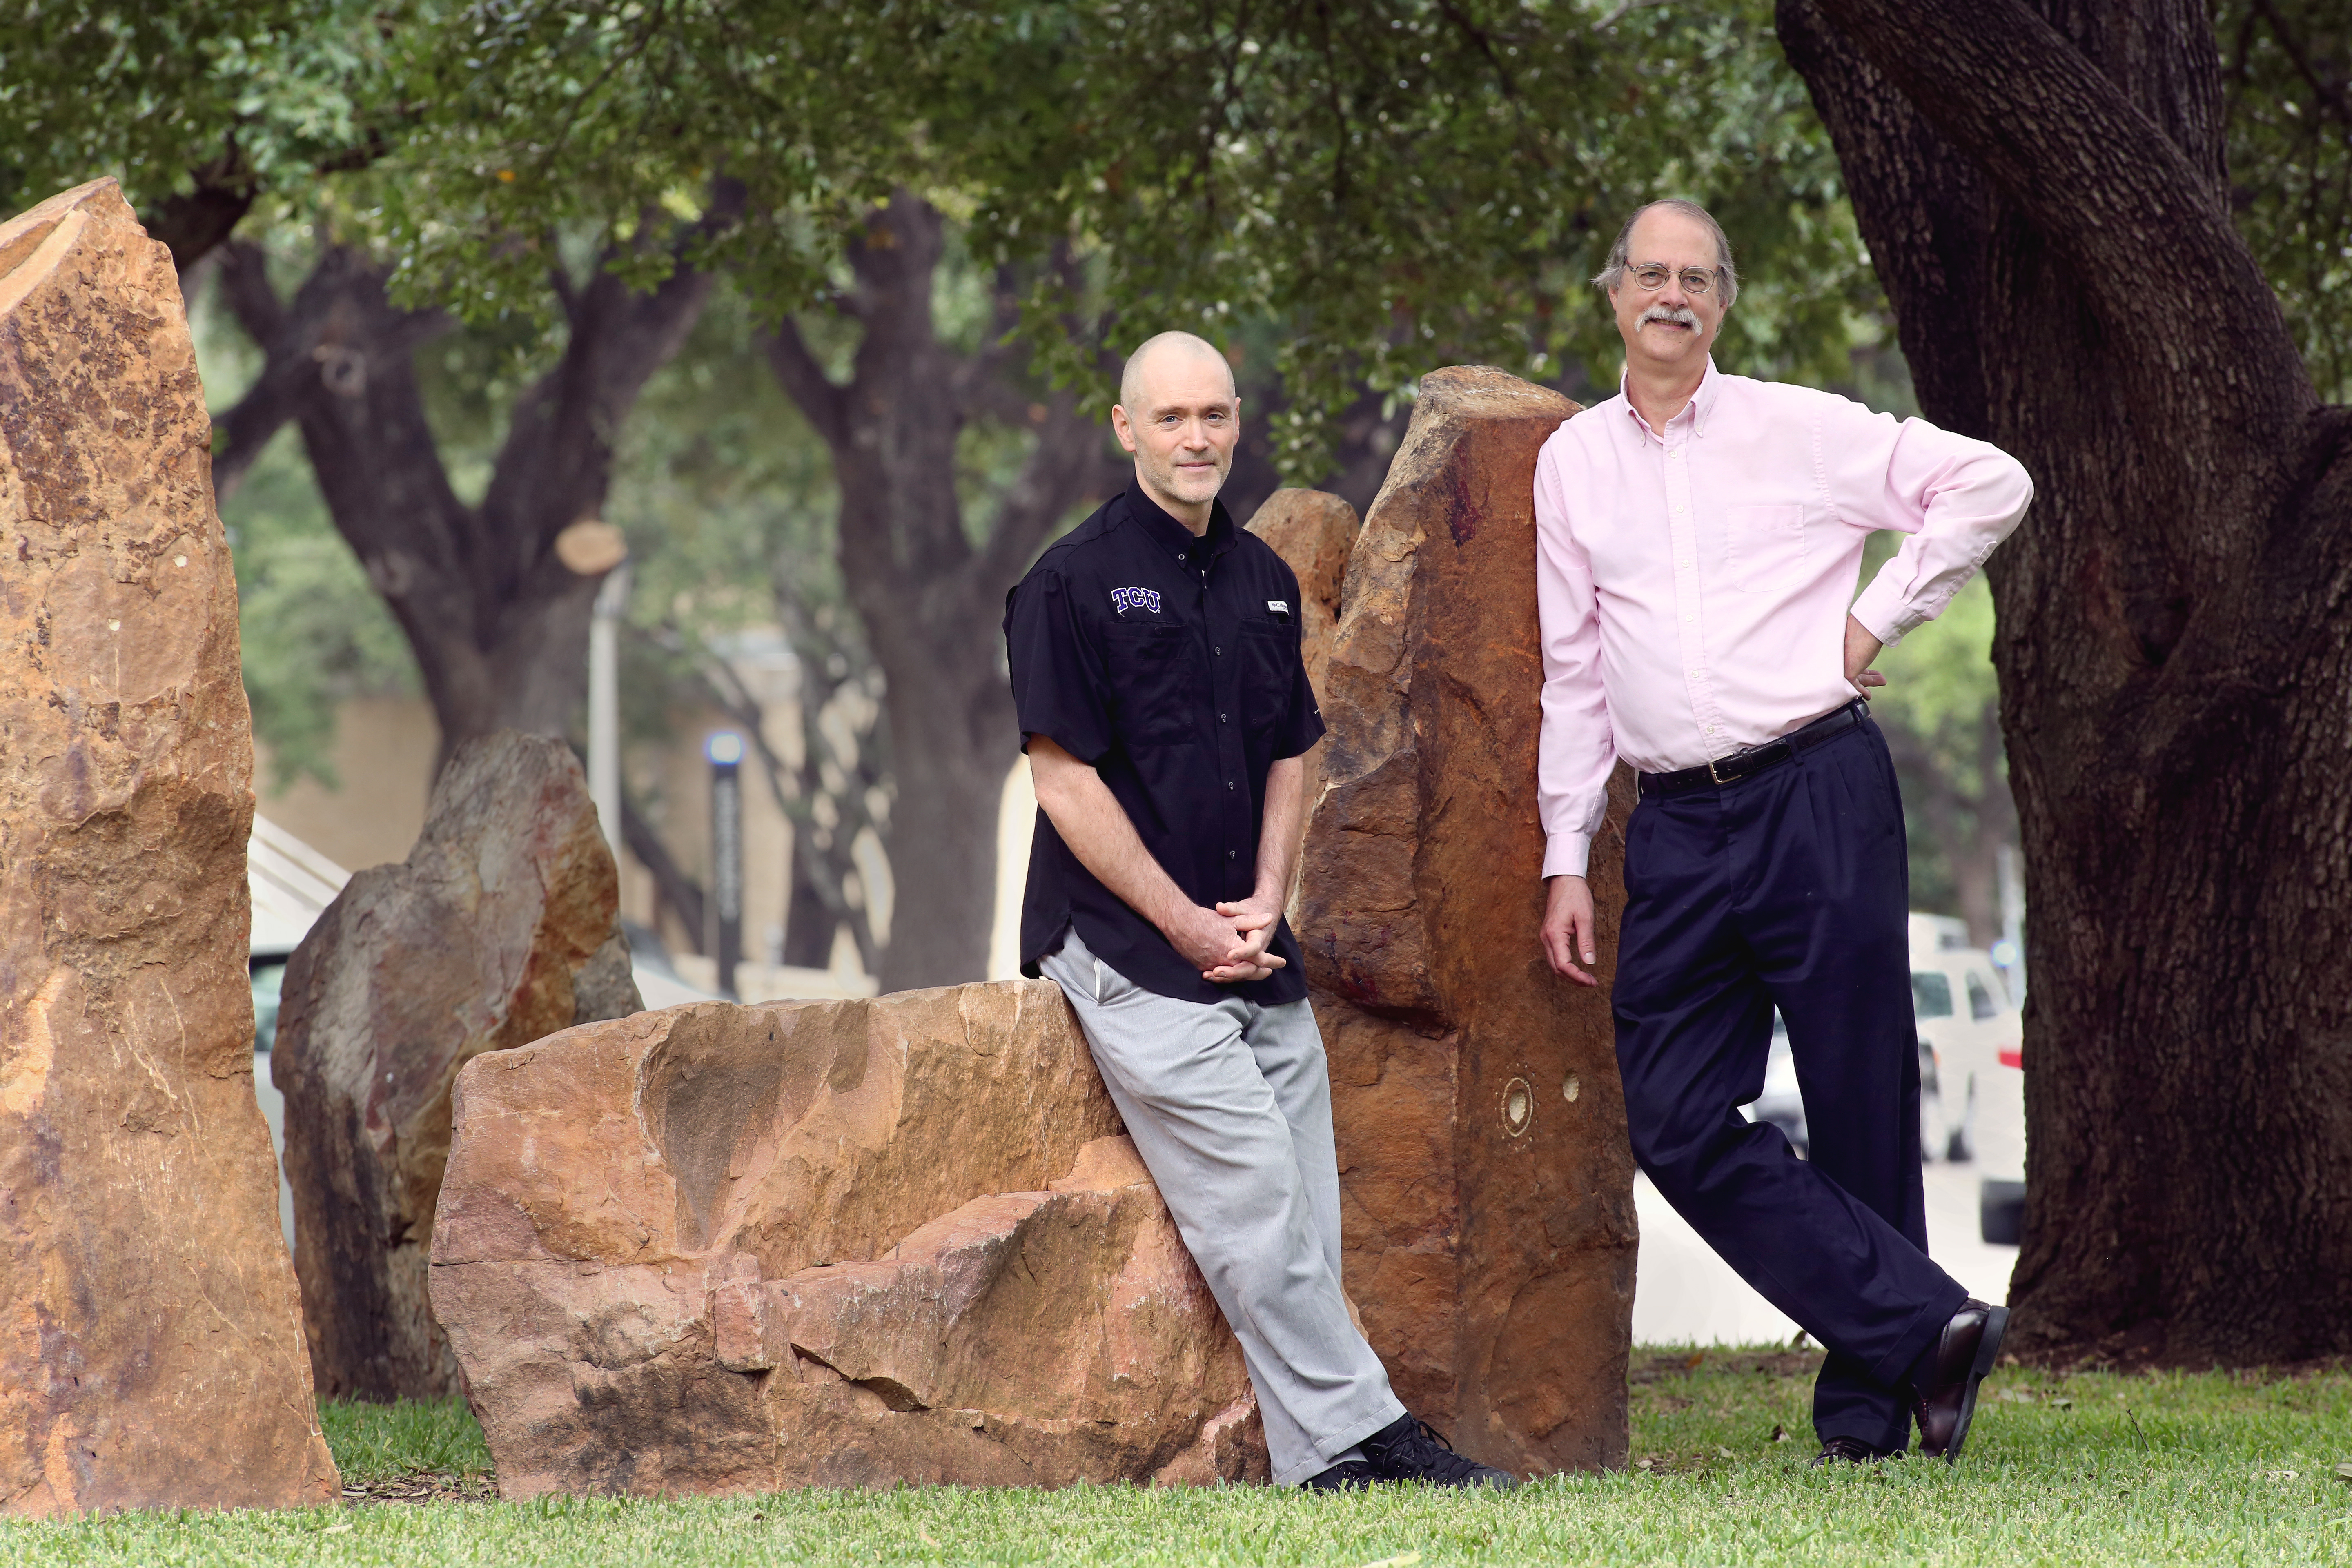 Mark Dennis, Ph.D., and Andy Fort, Ph.D., founders of TCU Contemplative Studies, pose for TCU Magazine in 2017. Credit TCU Marketing & Communication